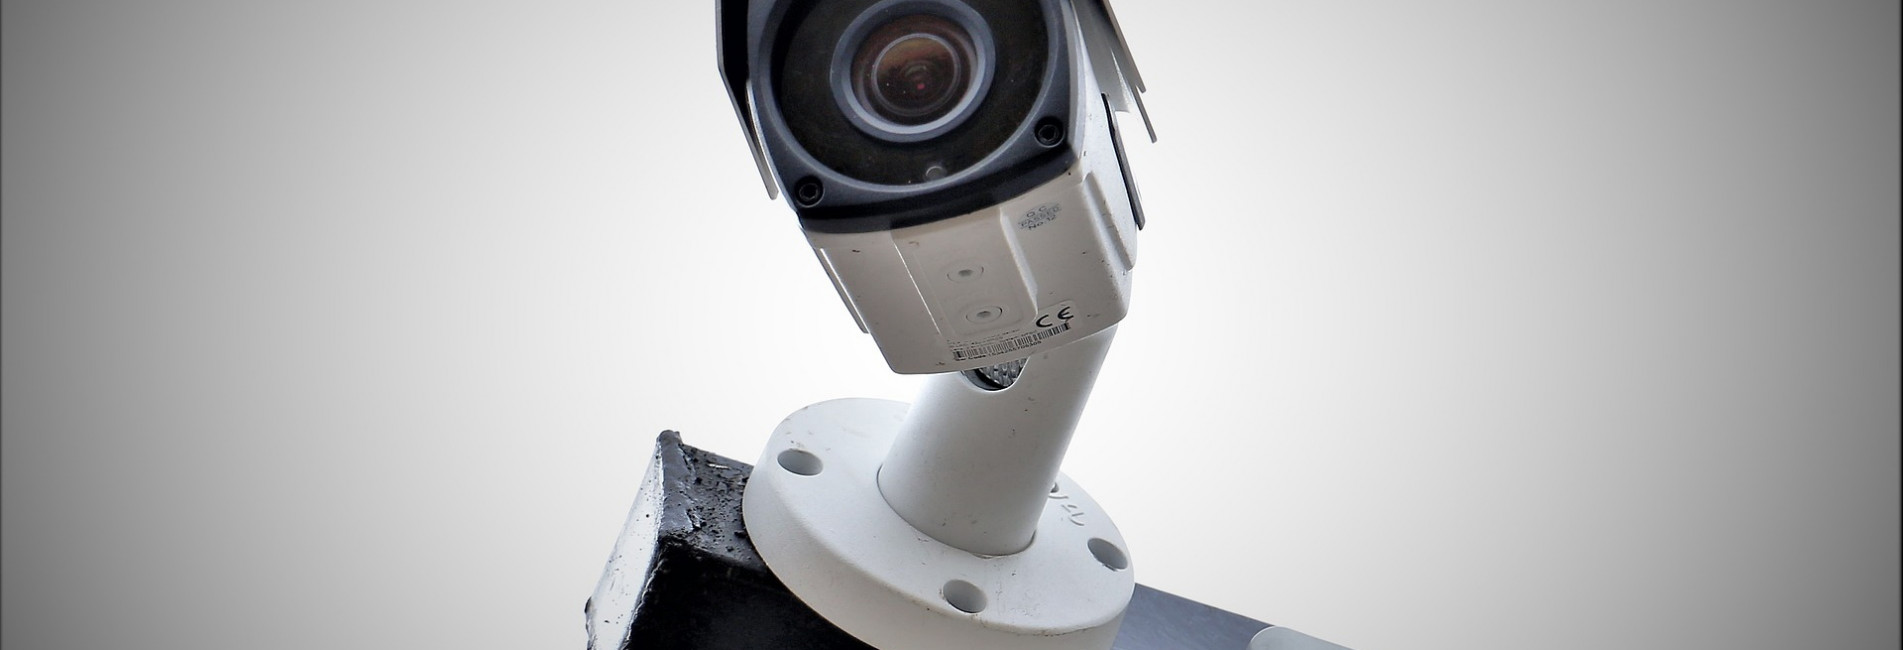 A suite of brand new CCTV cameras has been installed by ORP Surveillance in Market Drayton in the hopes of reassuring townspeople and deterring criminals.